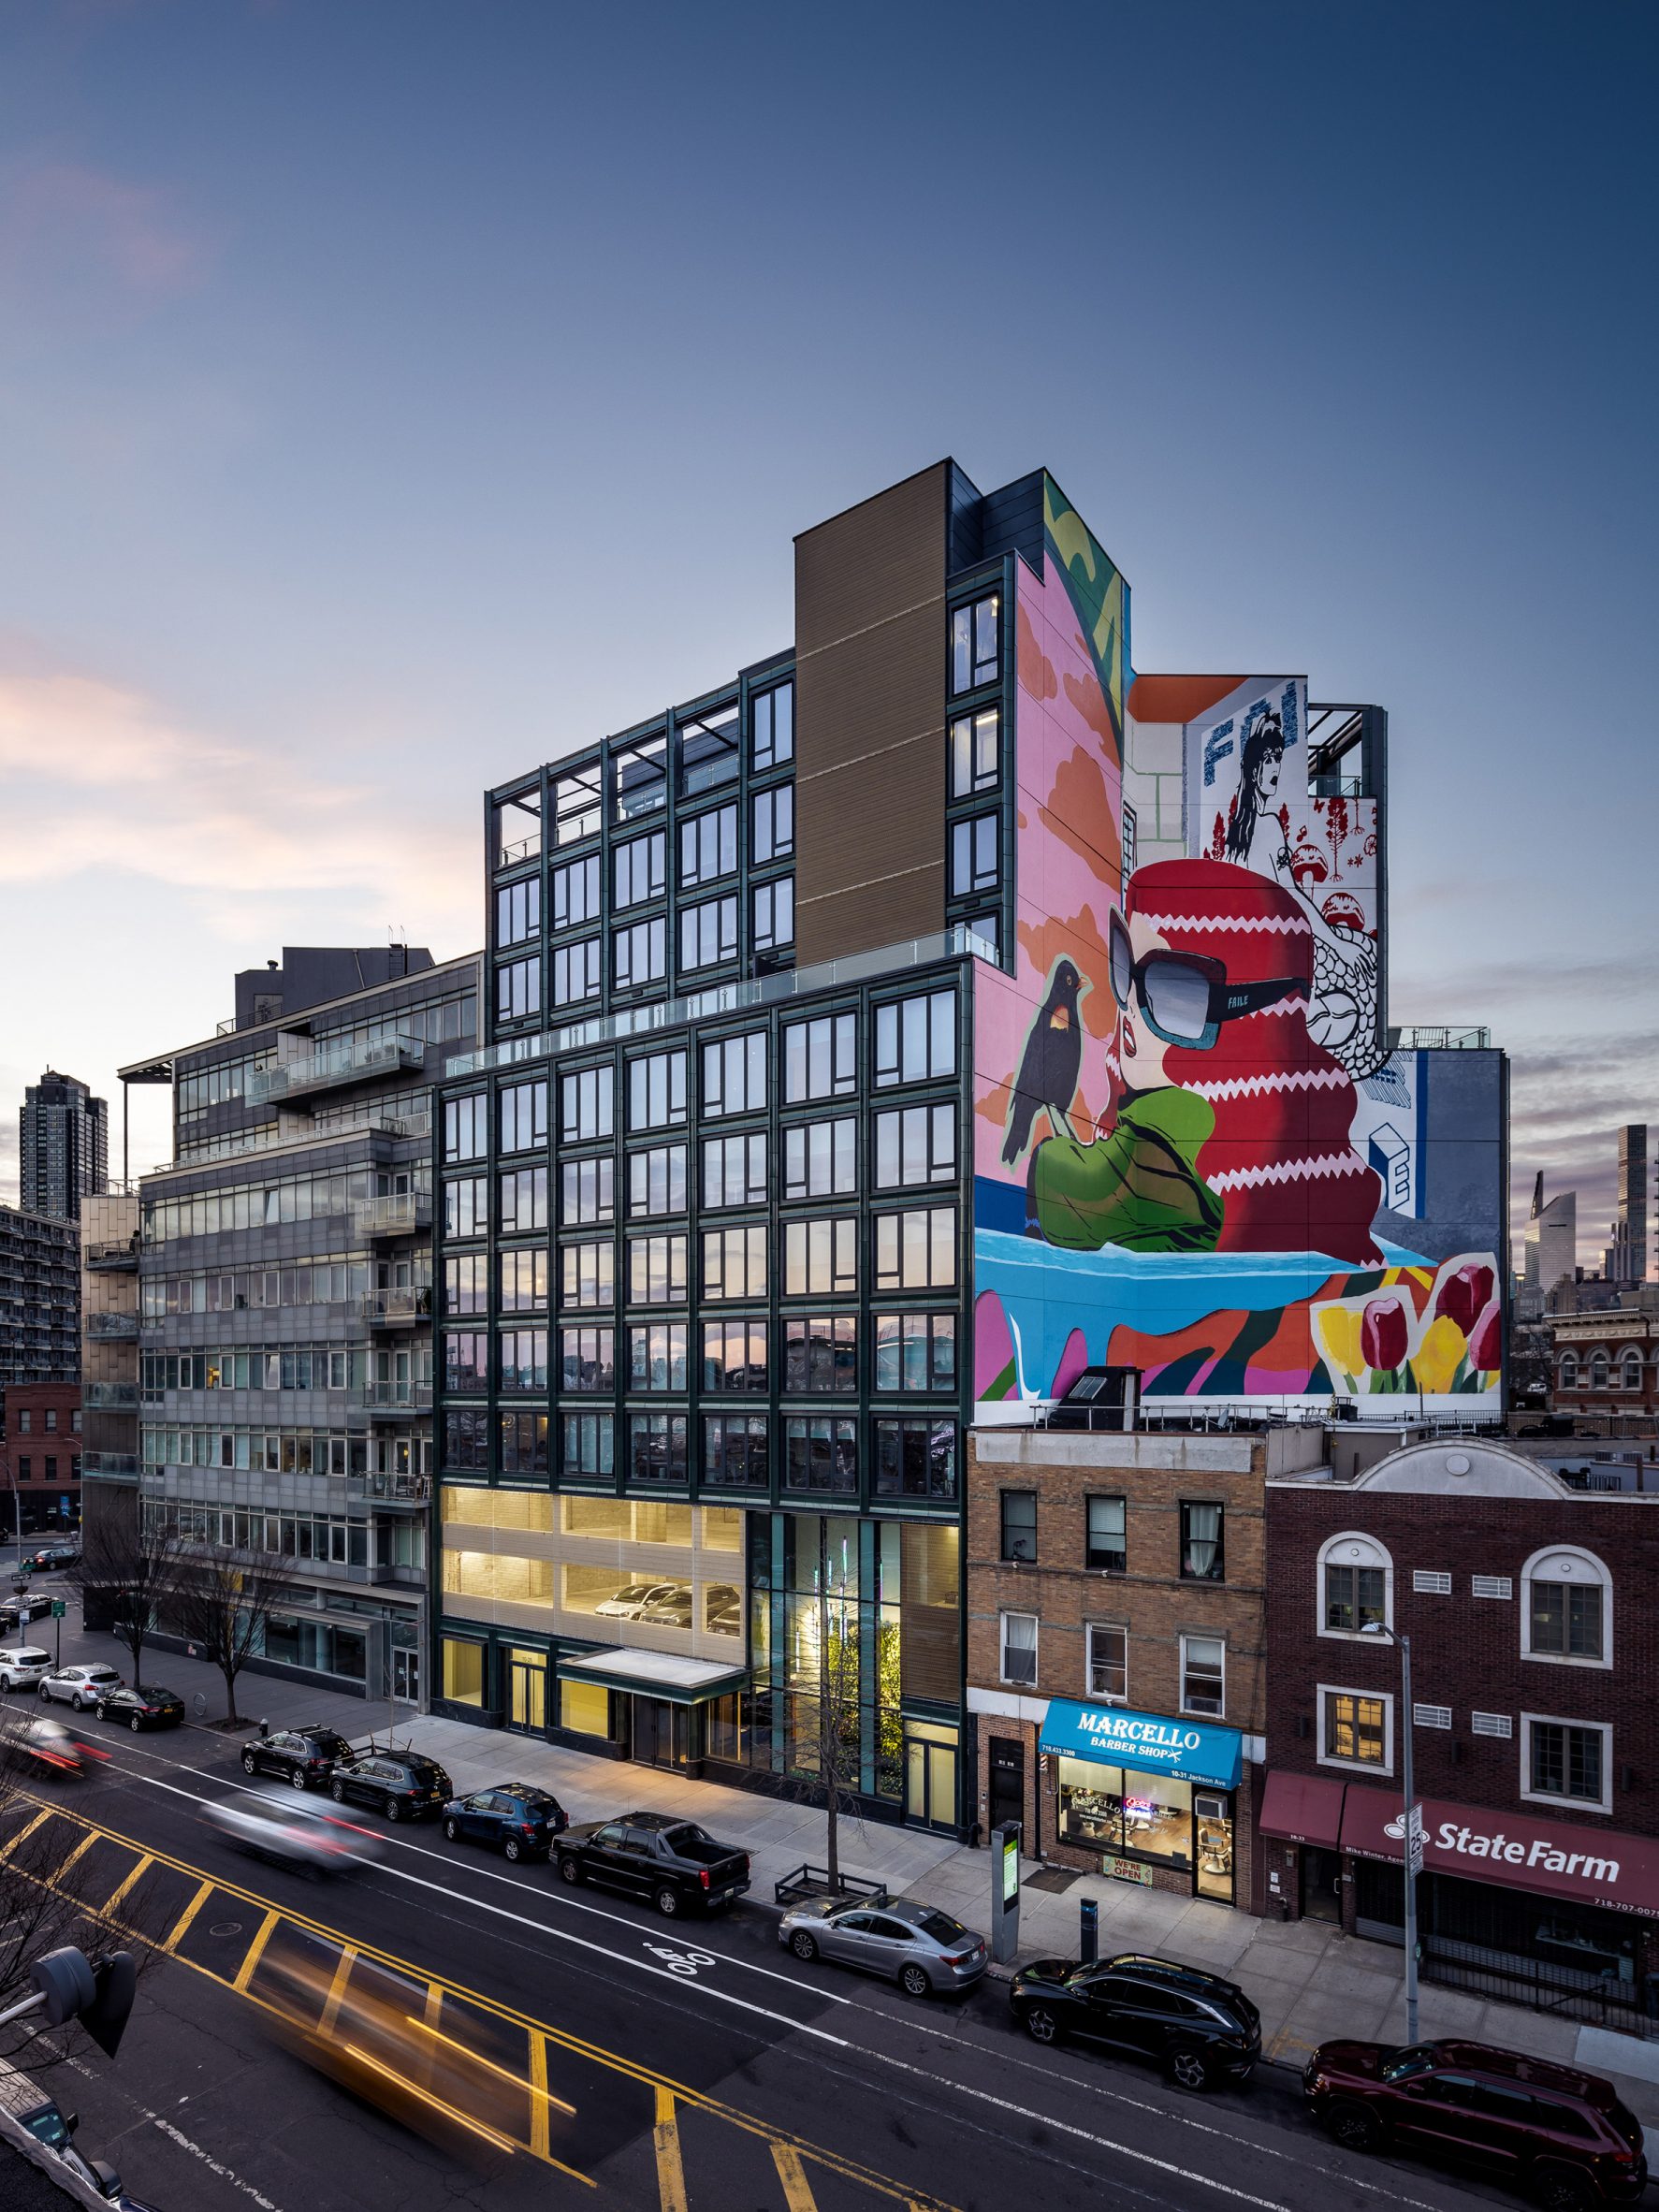 Photograph of a mural on The Green House in Long Island city